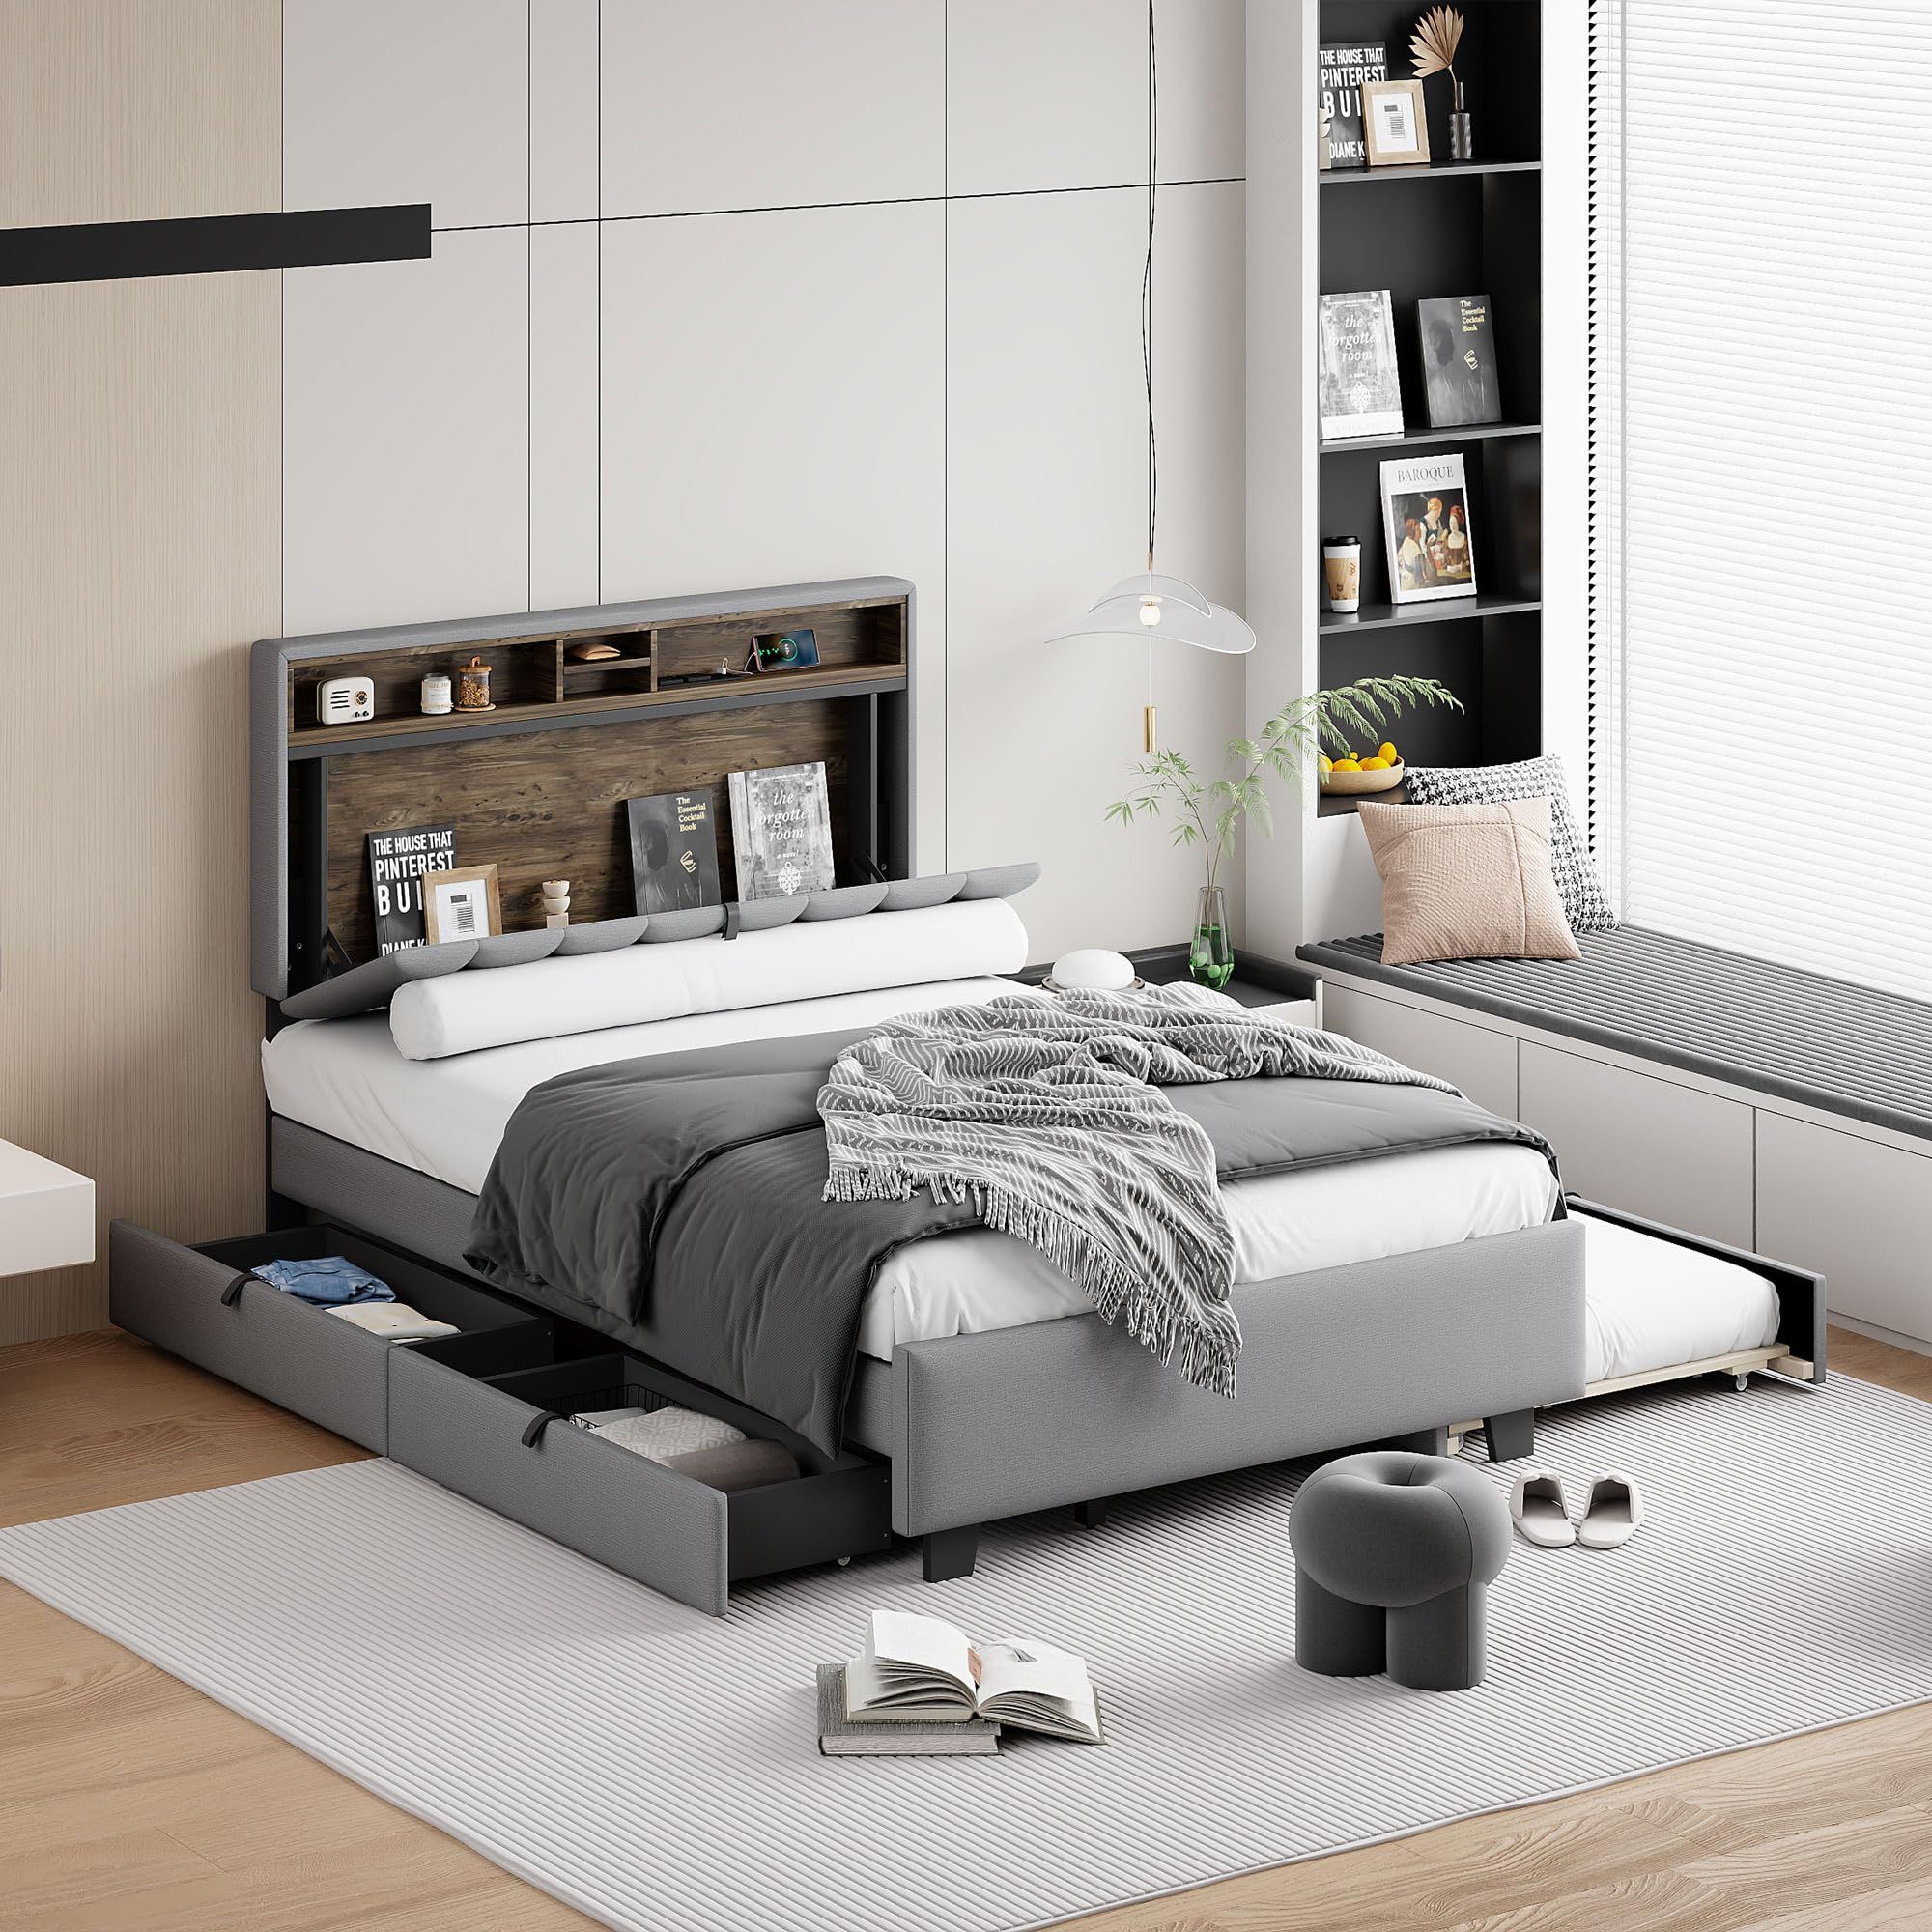 Elegant and Functional Queen Platform Bed with Storage Drawers